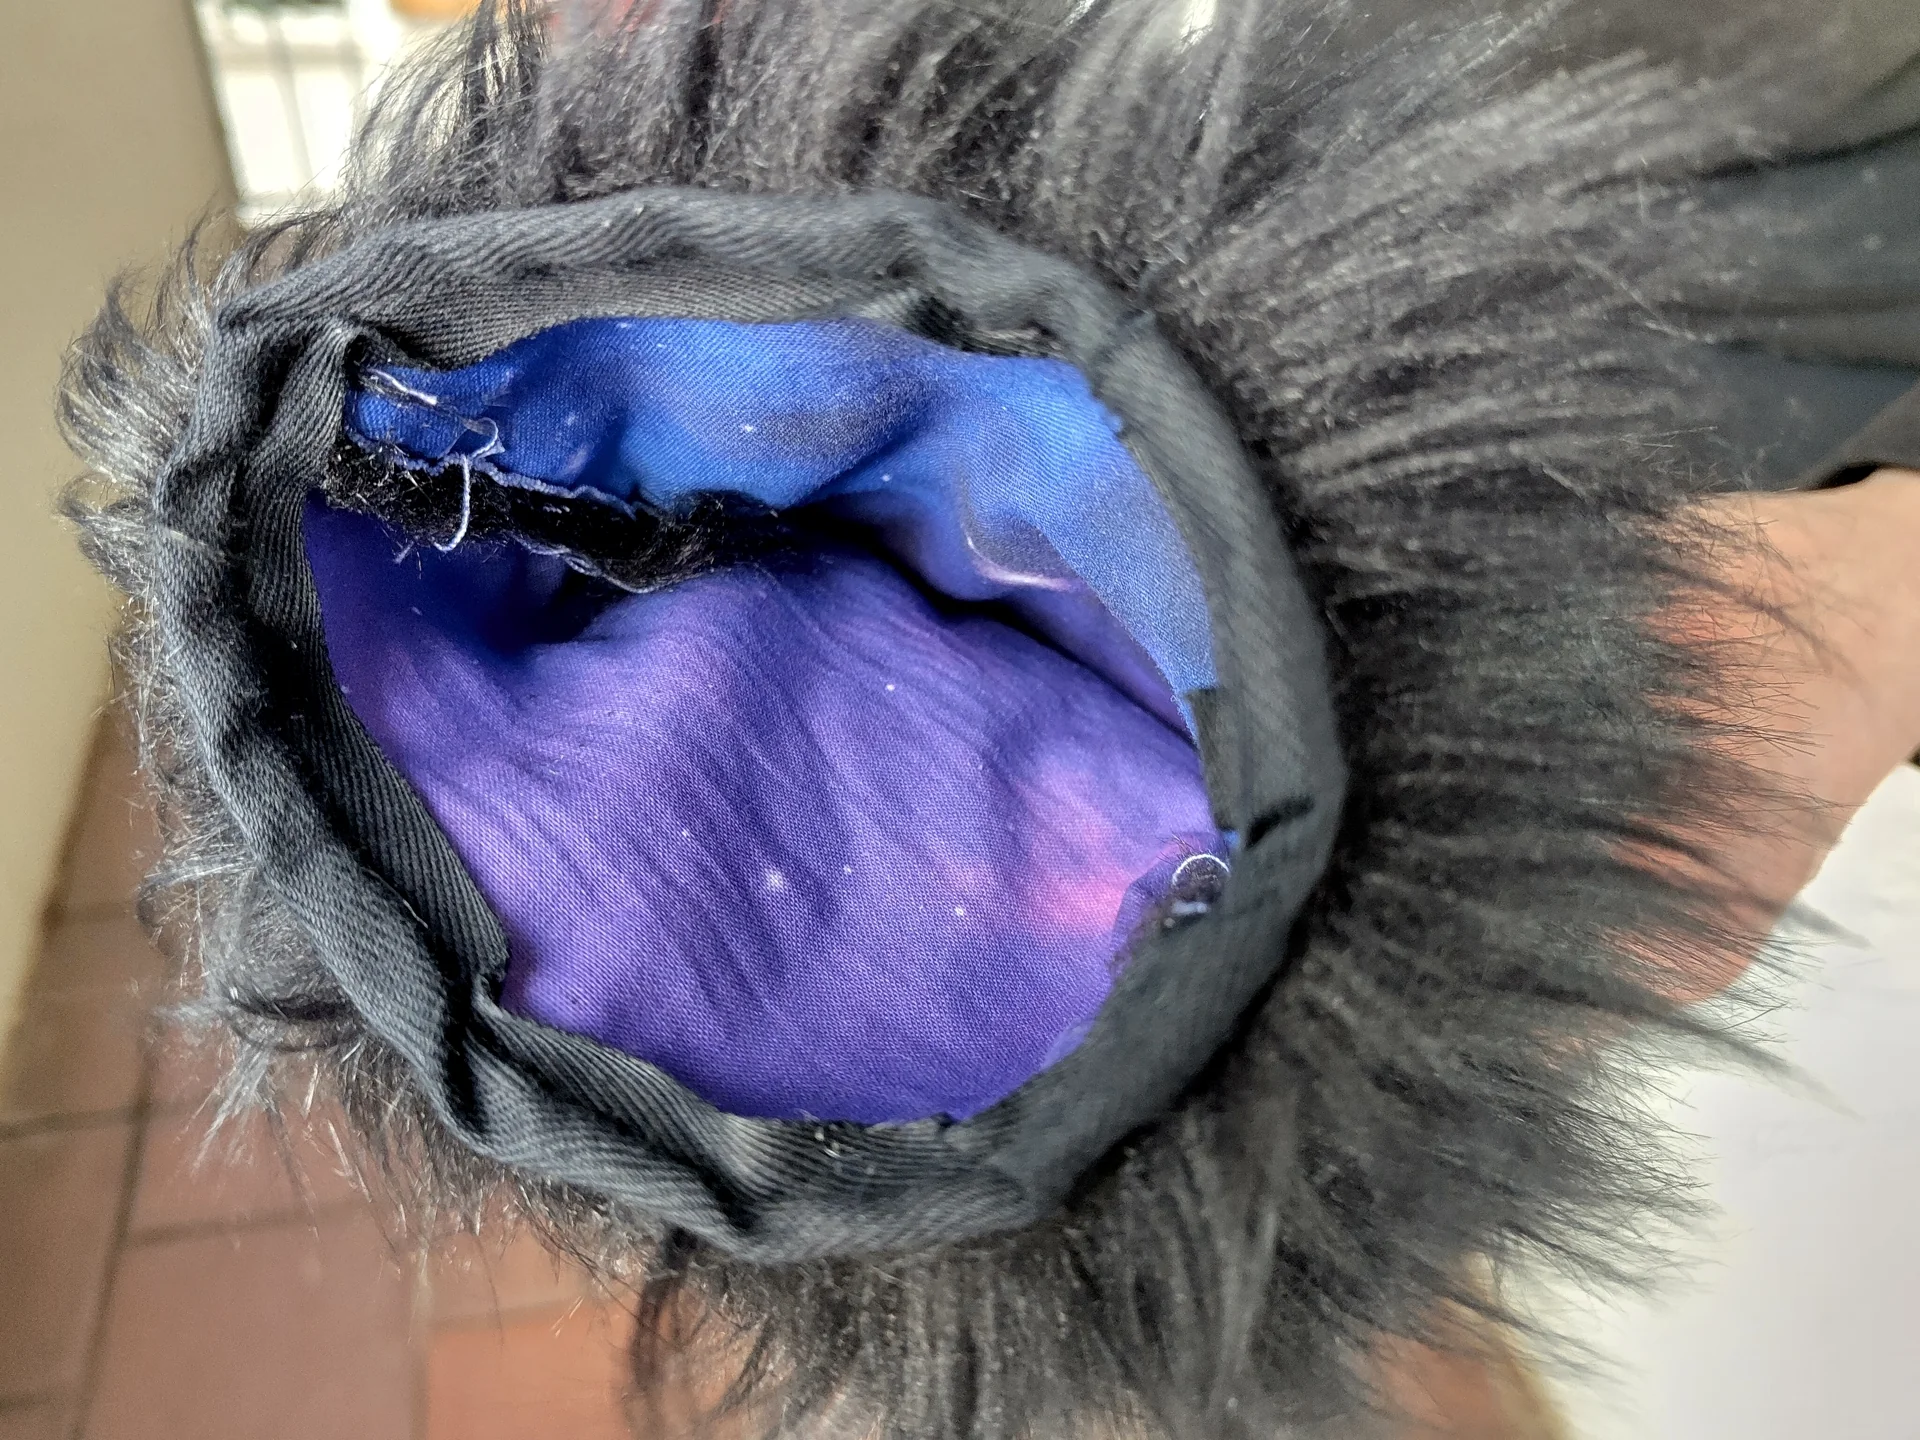 Inside view of the sewn paw pads with blue/purple cotton lining.